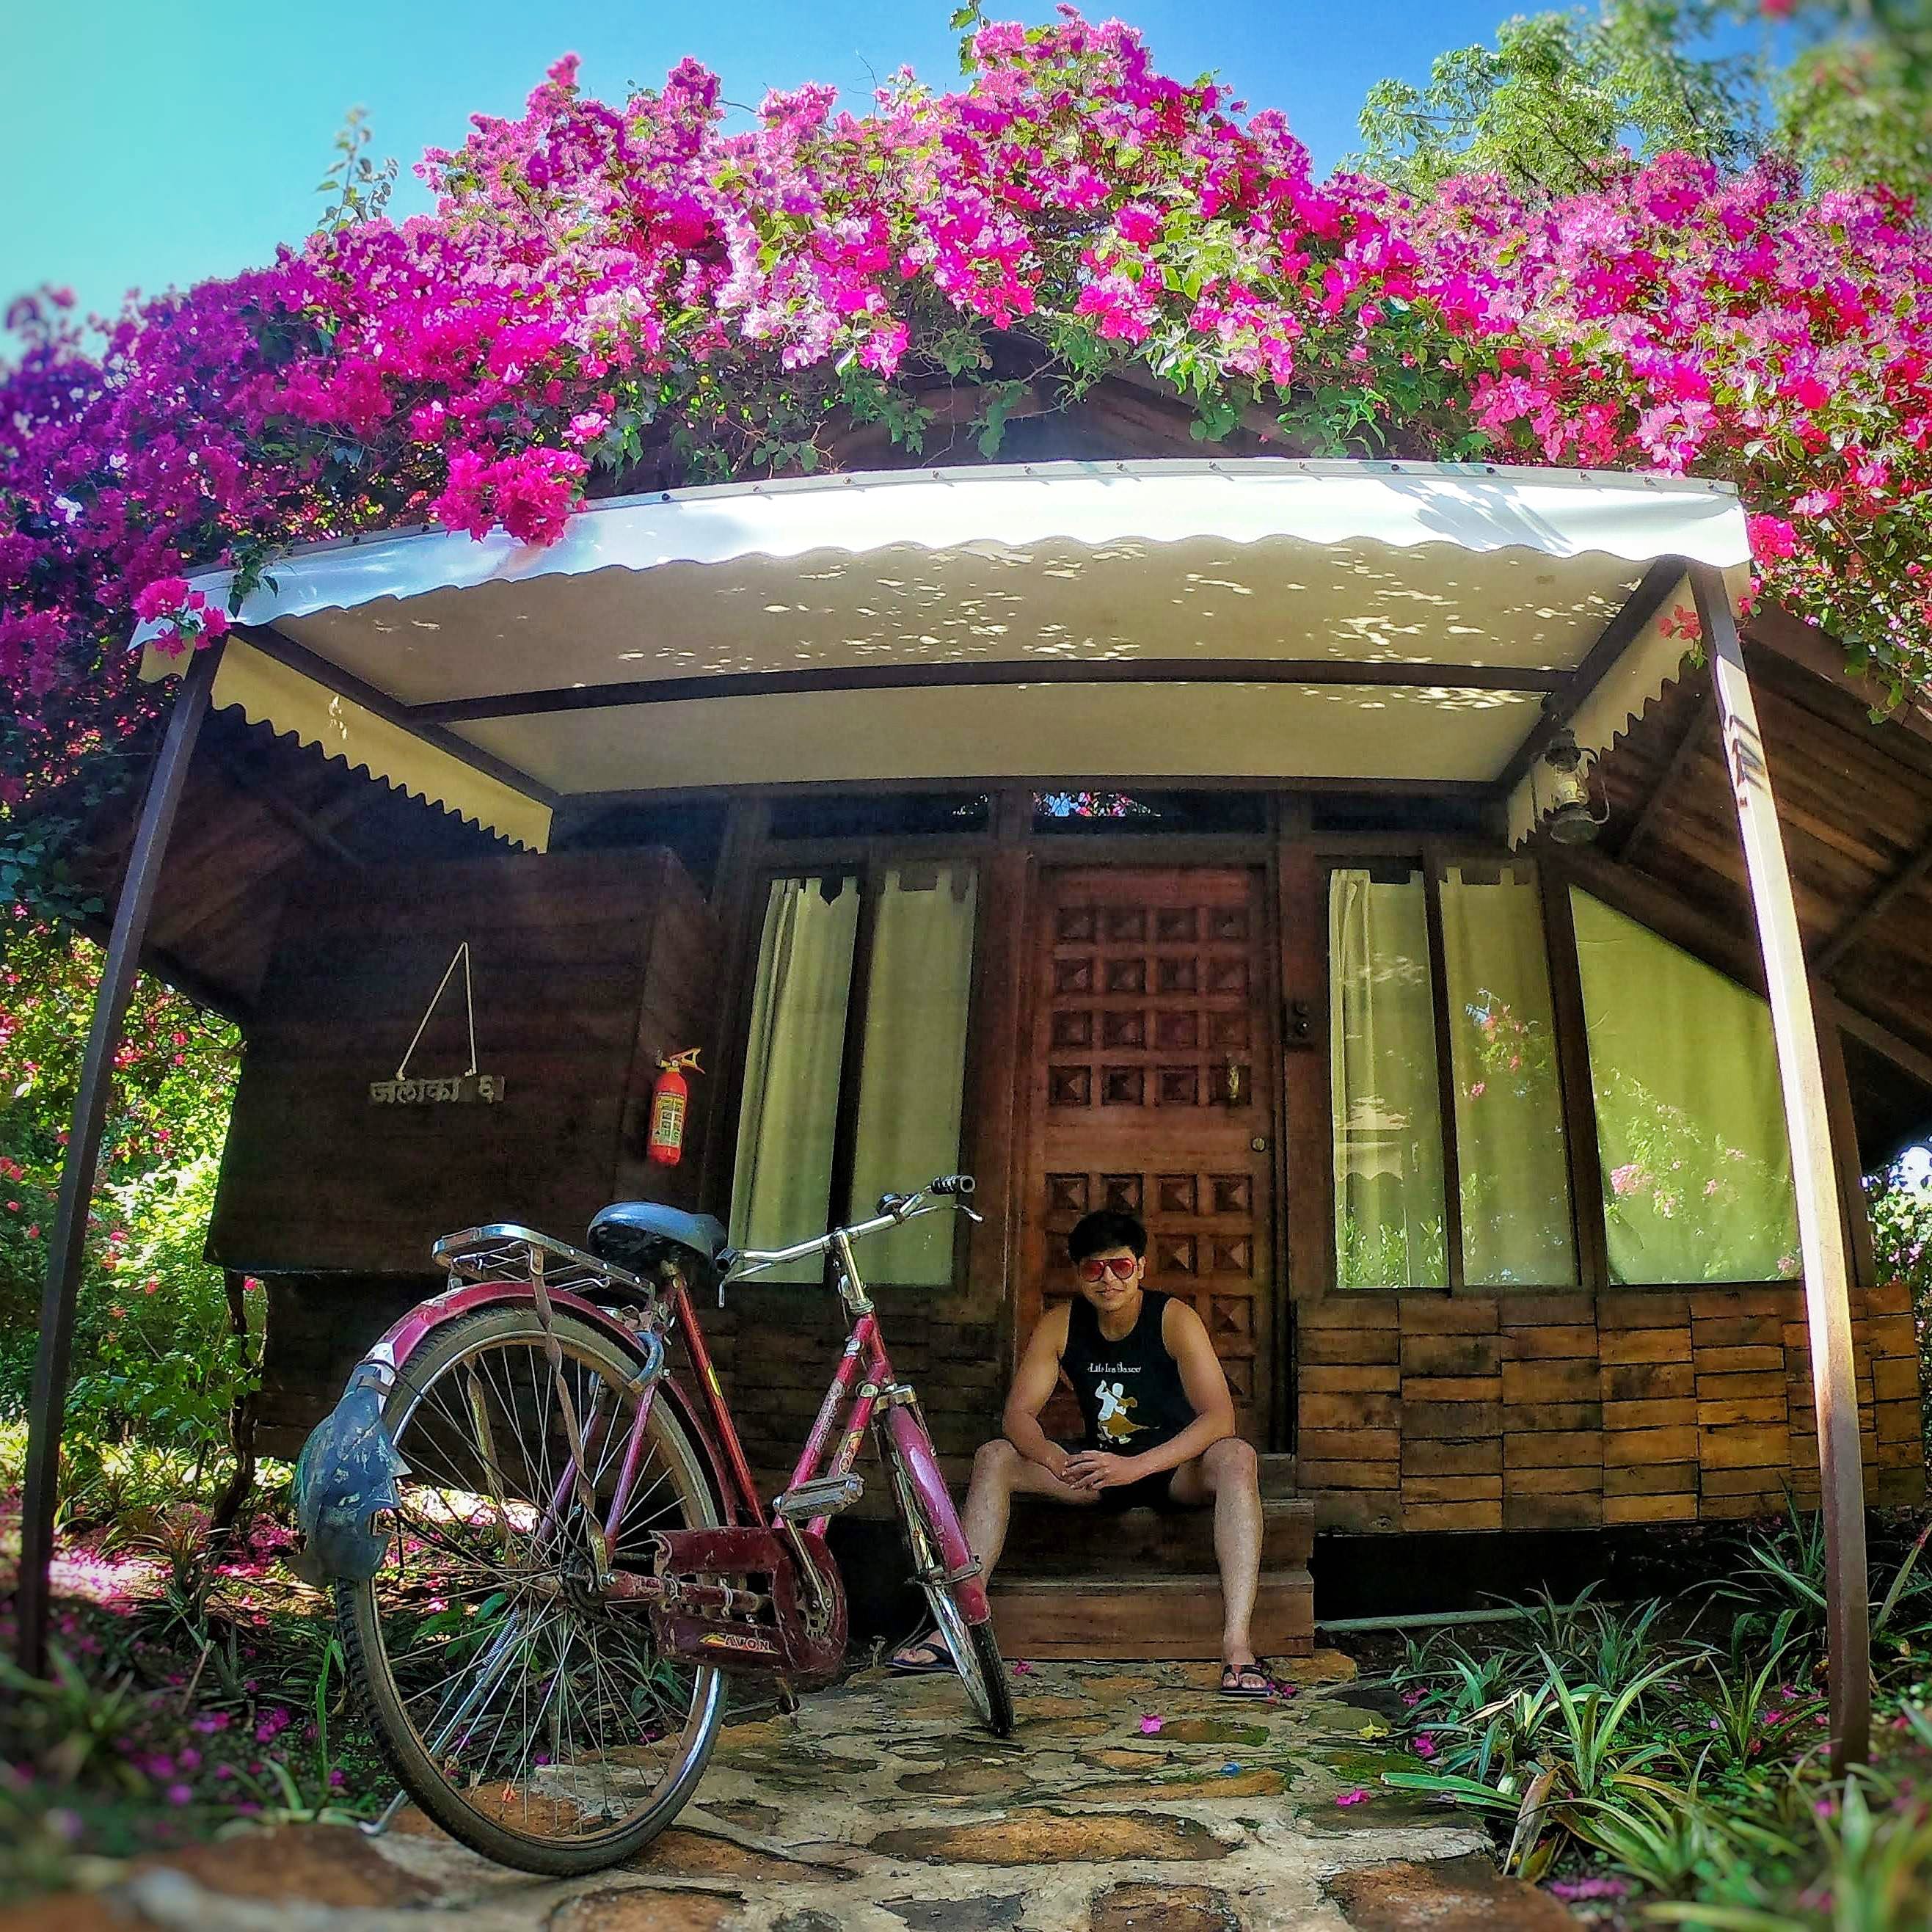 Bicycle wheel,Vehicle,Pink,Transport,Bicycle,Plant,Flower,Tree,House,Building